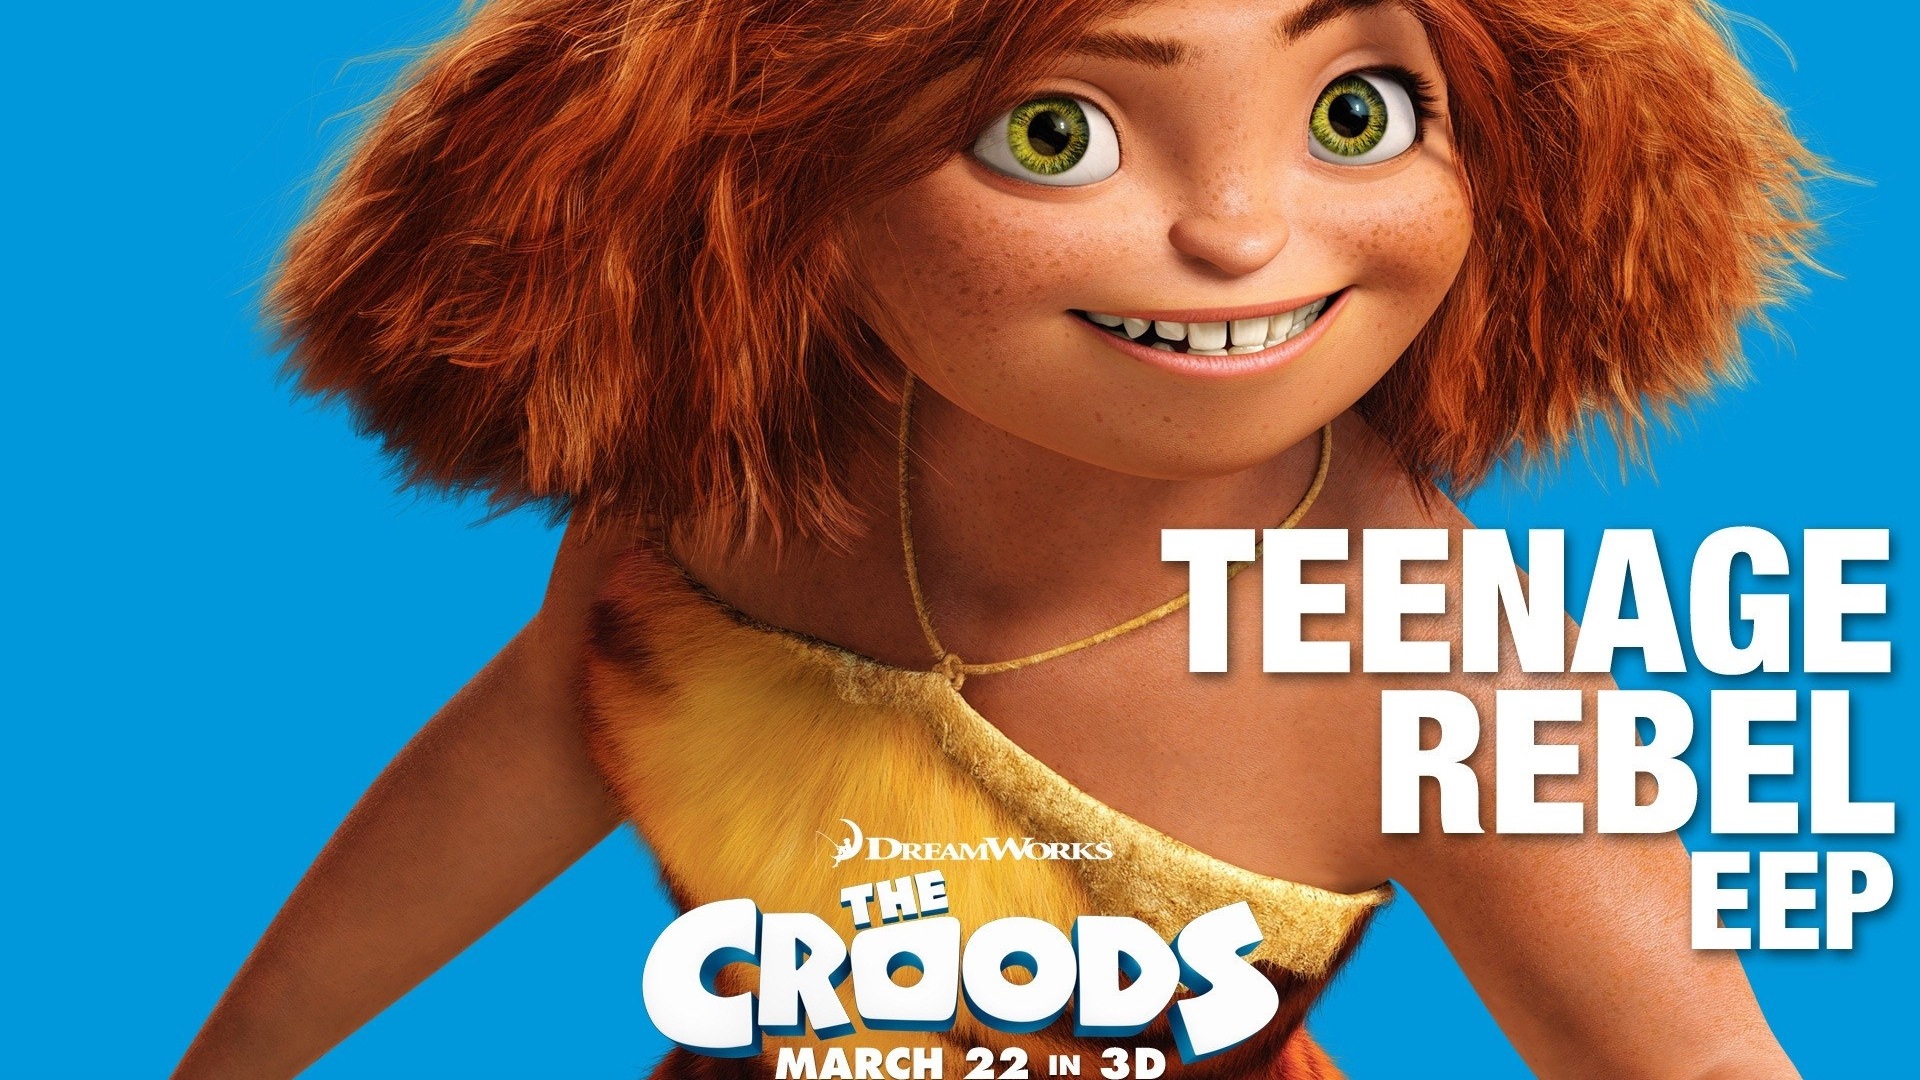 V Croods HD Movie Wallpapers #10 - 1920x1080